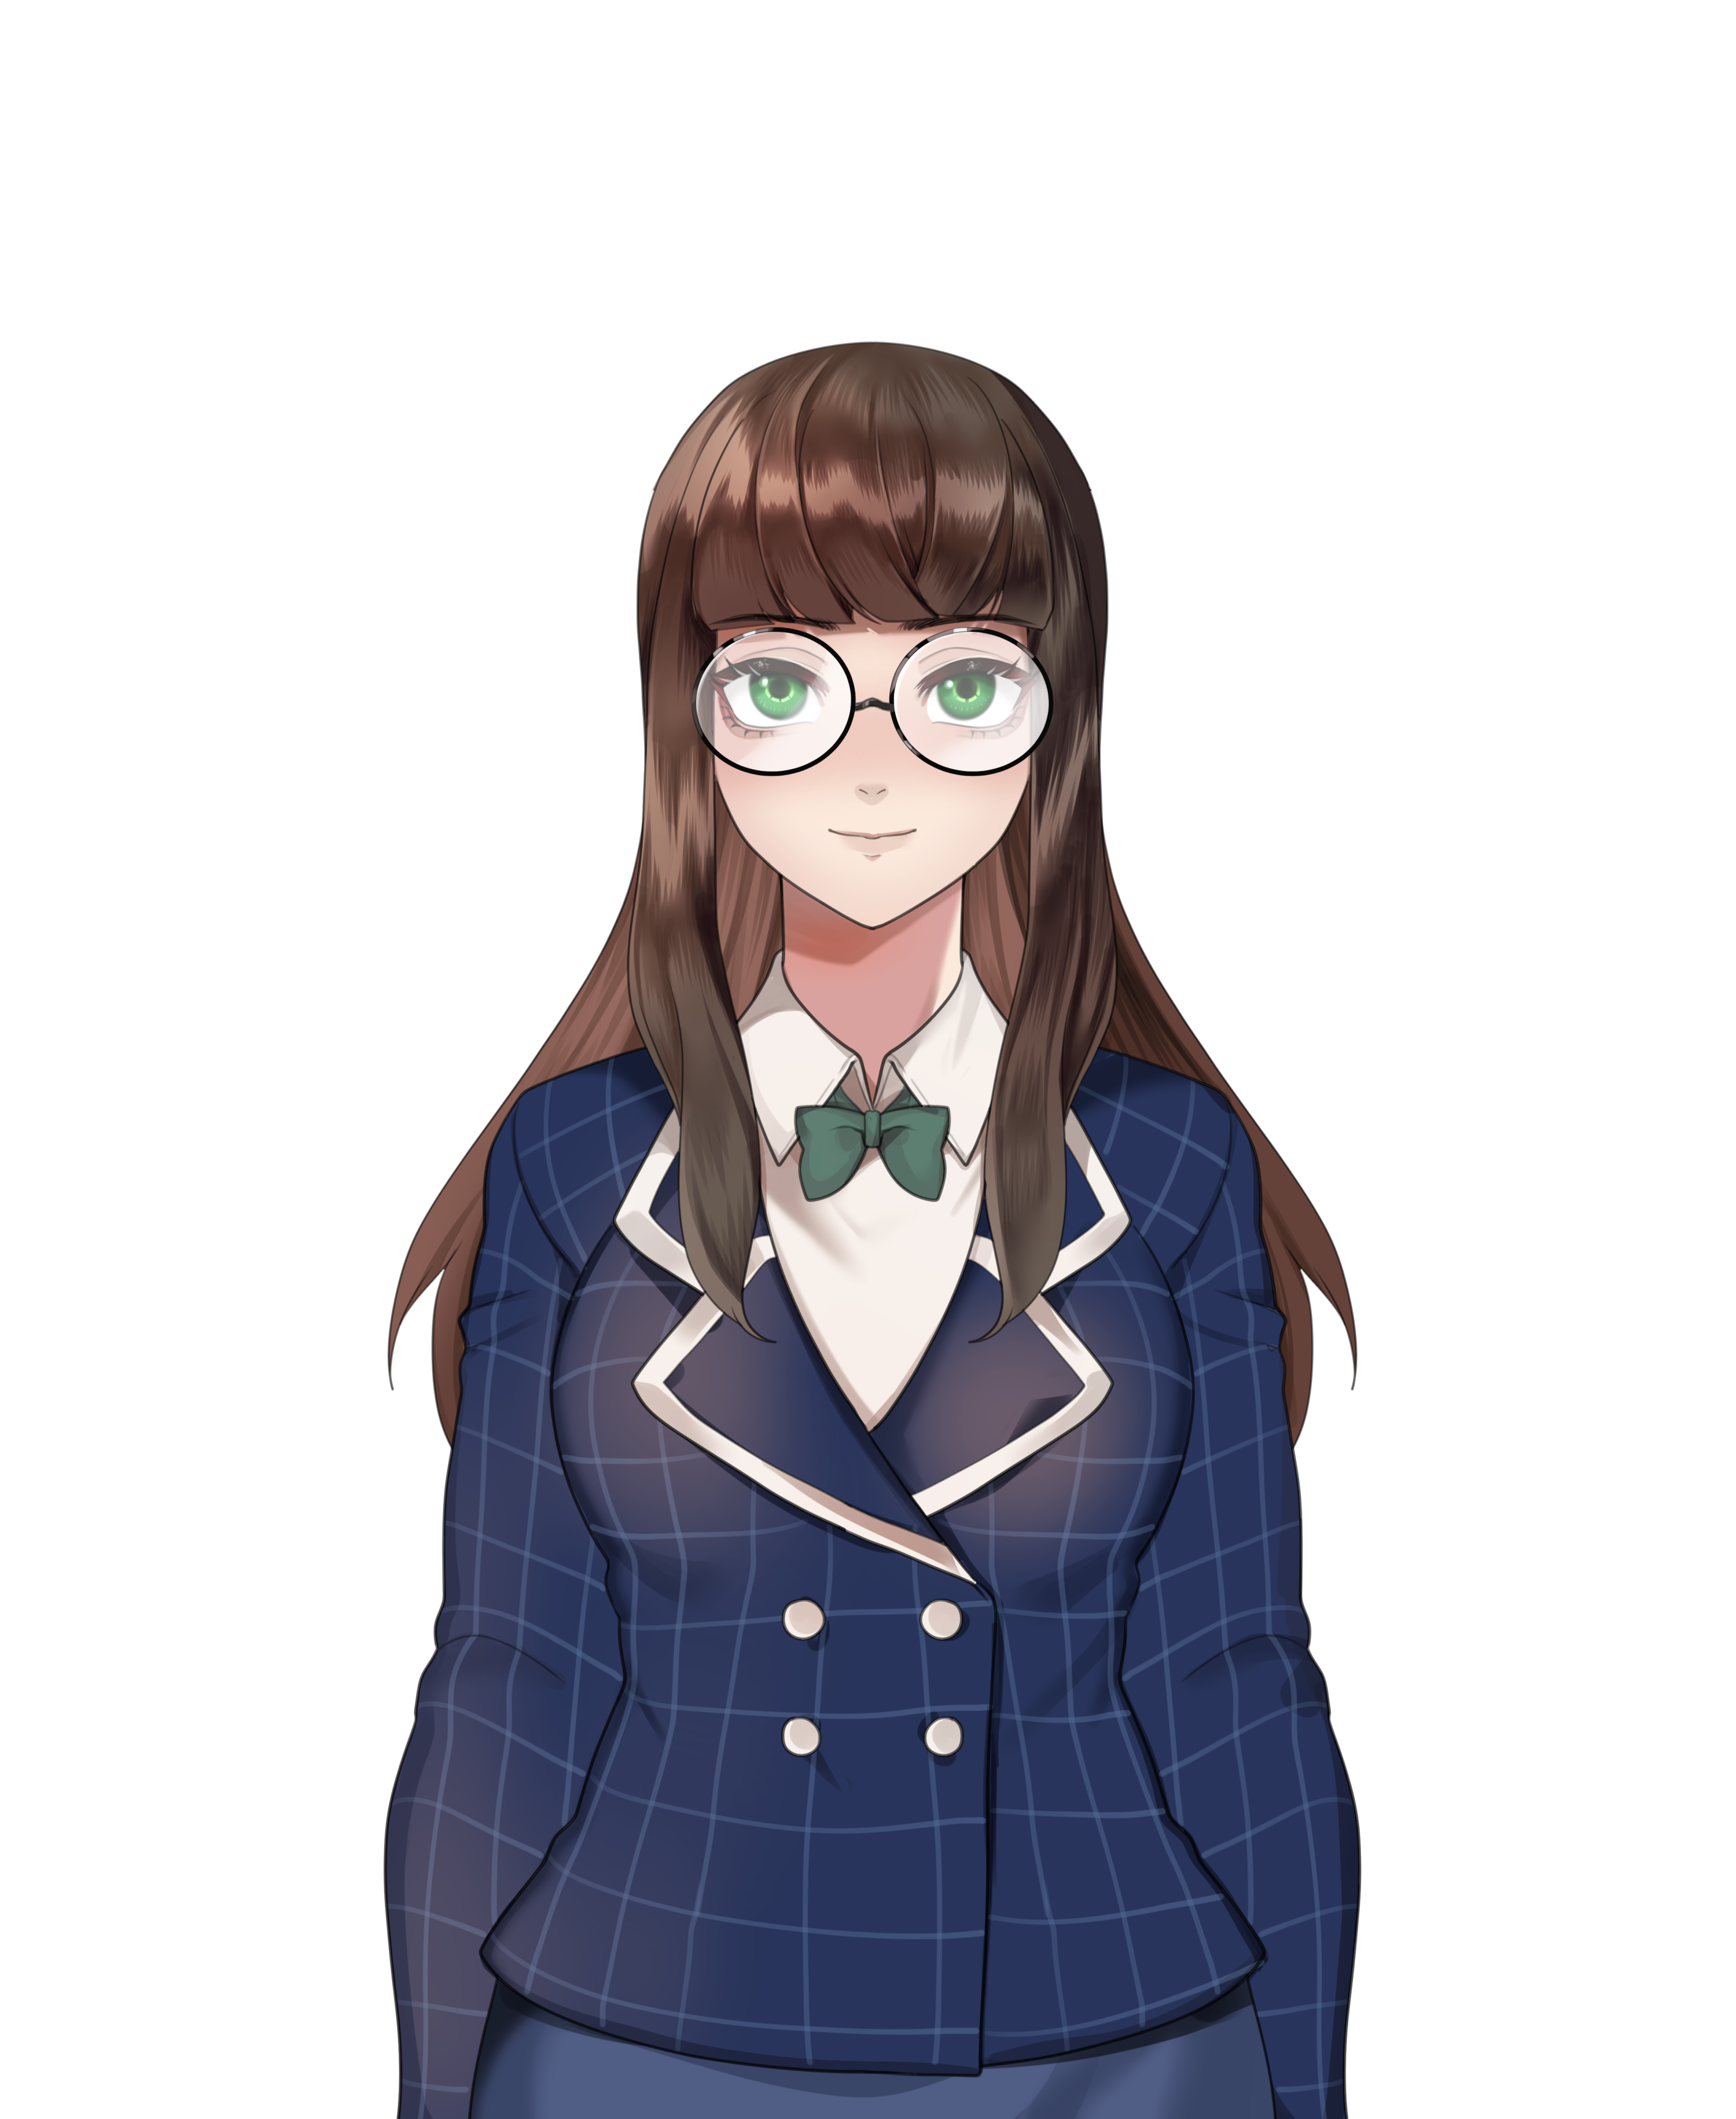 An image of the character Hannah from the visual novel The Many Deaths of Lily Kosen